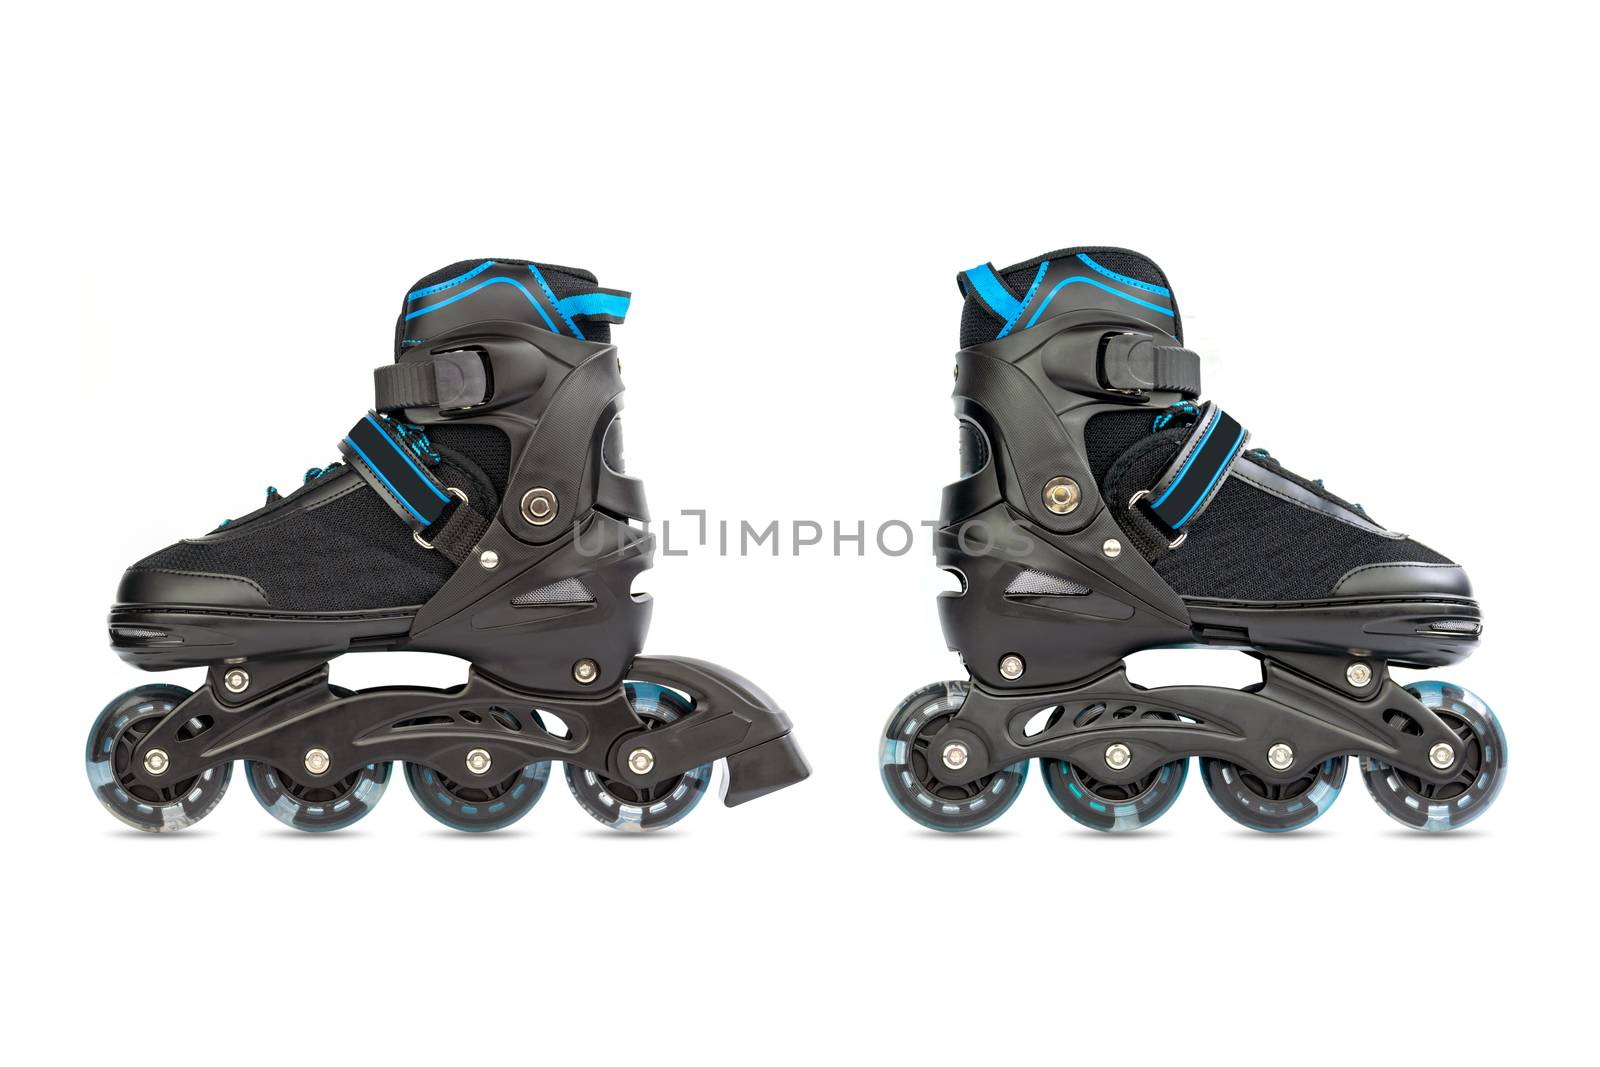 Pair of children's new inline skates isolated on white background.